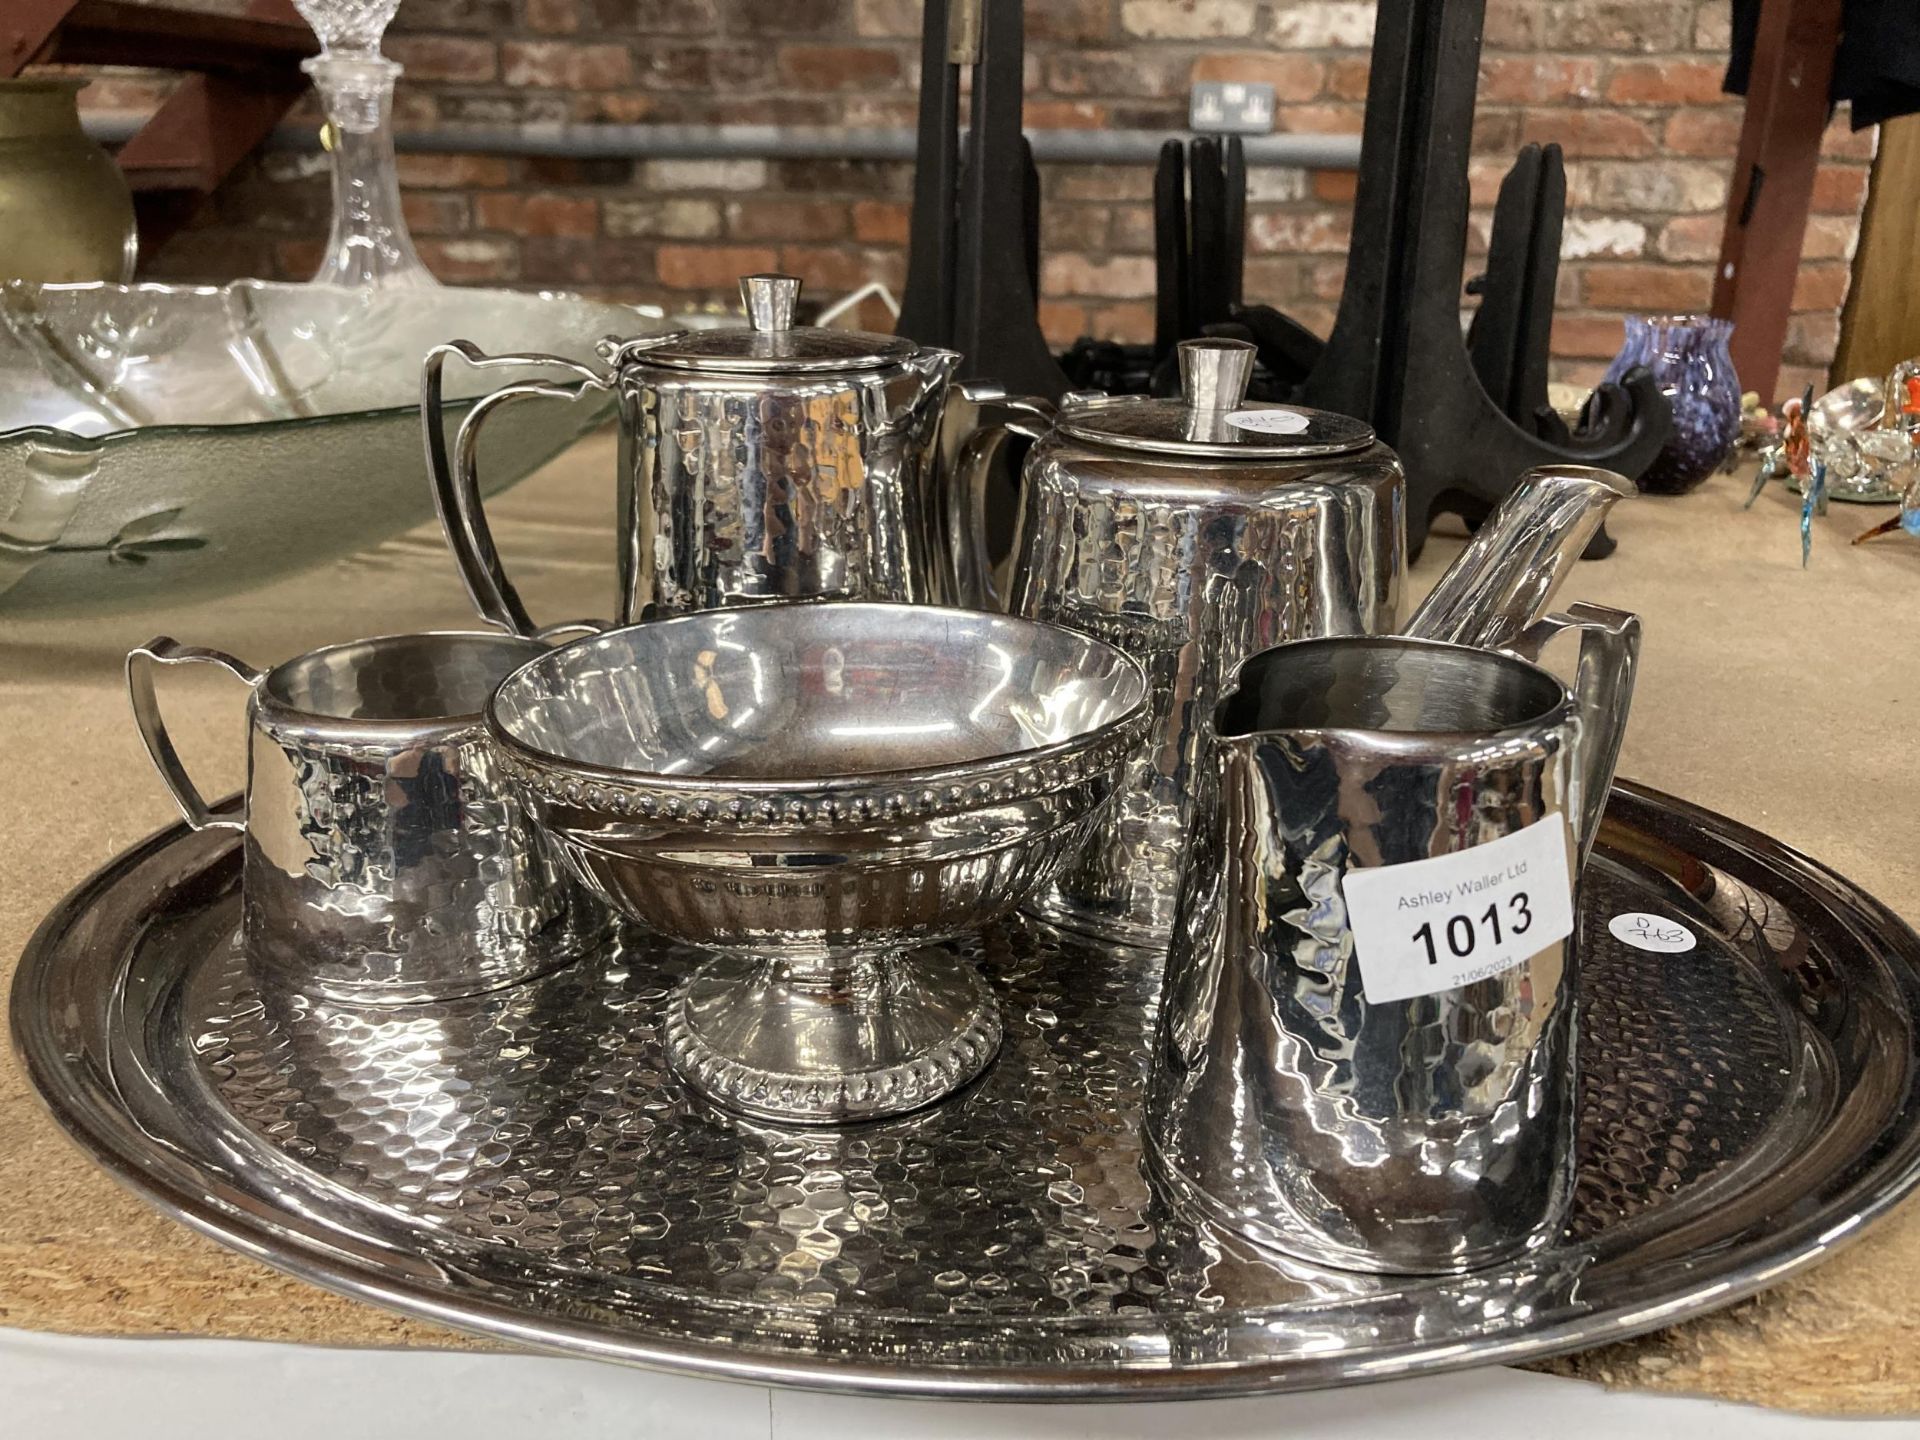 A SILVER PLATED OLD HALL TEASET TO INCLUDE A TRAY, TEAPOT, HOT WATER JUG, CREAM JUG AND SUGAR BOWLS - Image 2 of 2